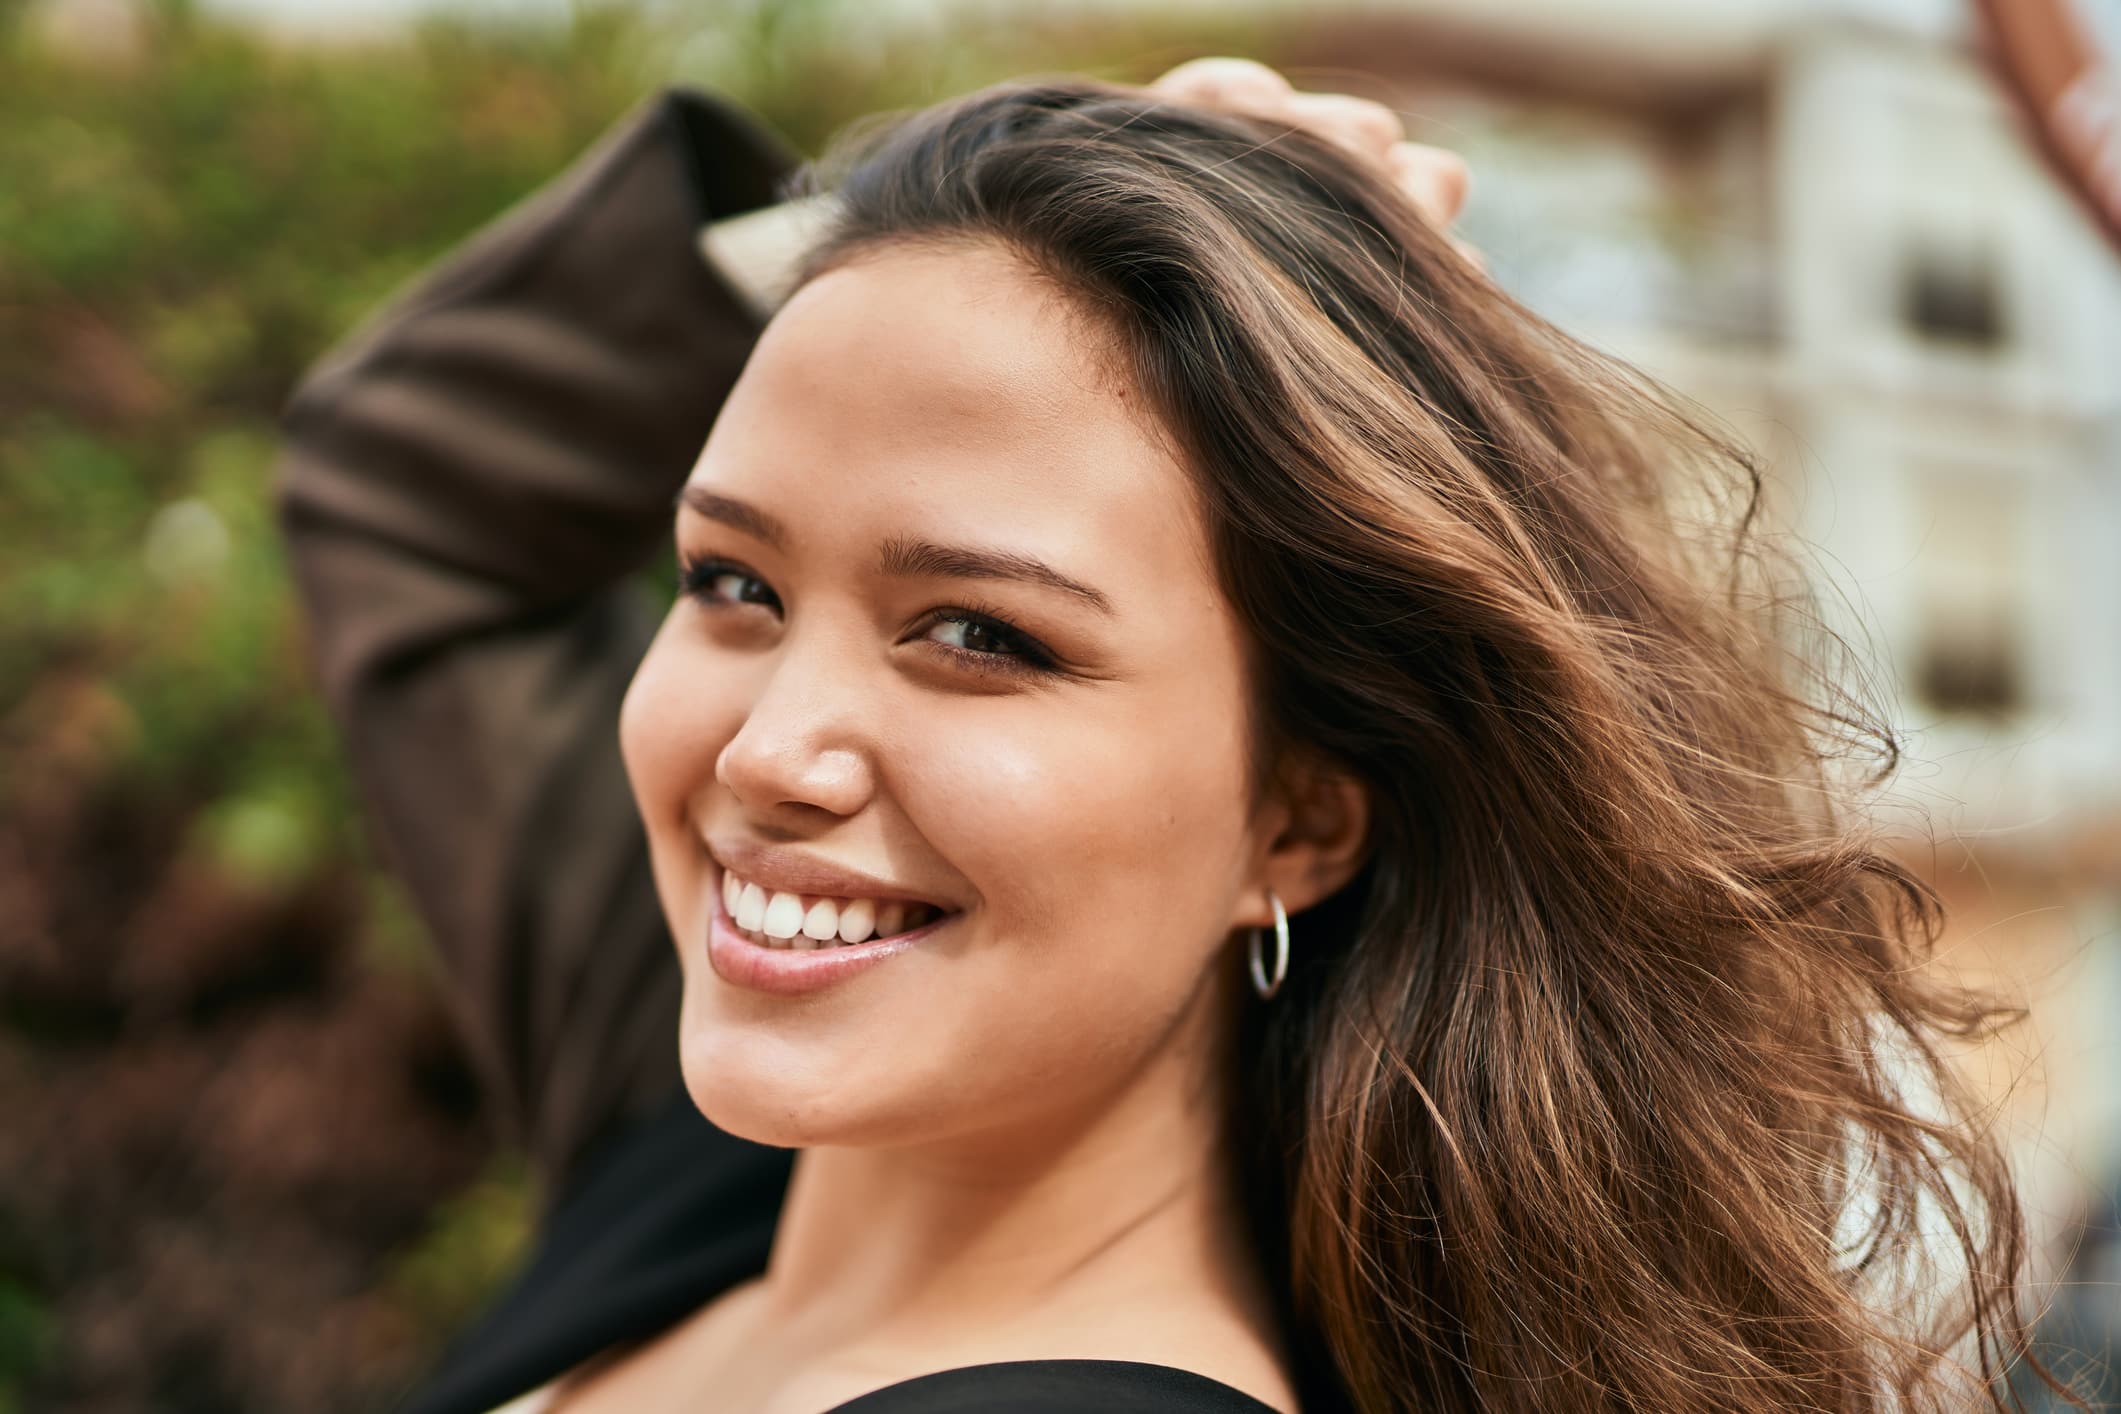 young woman smiling in park 